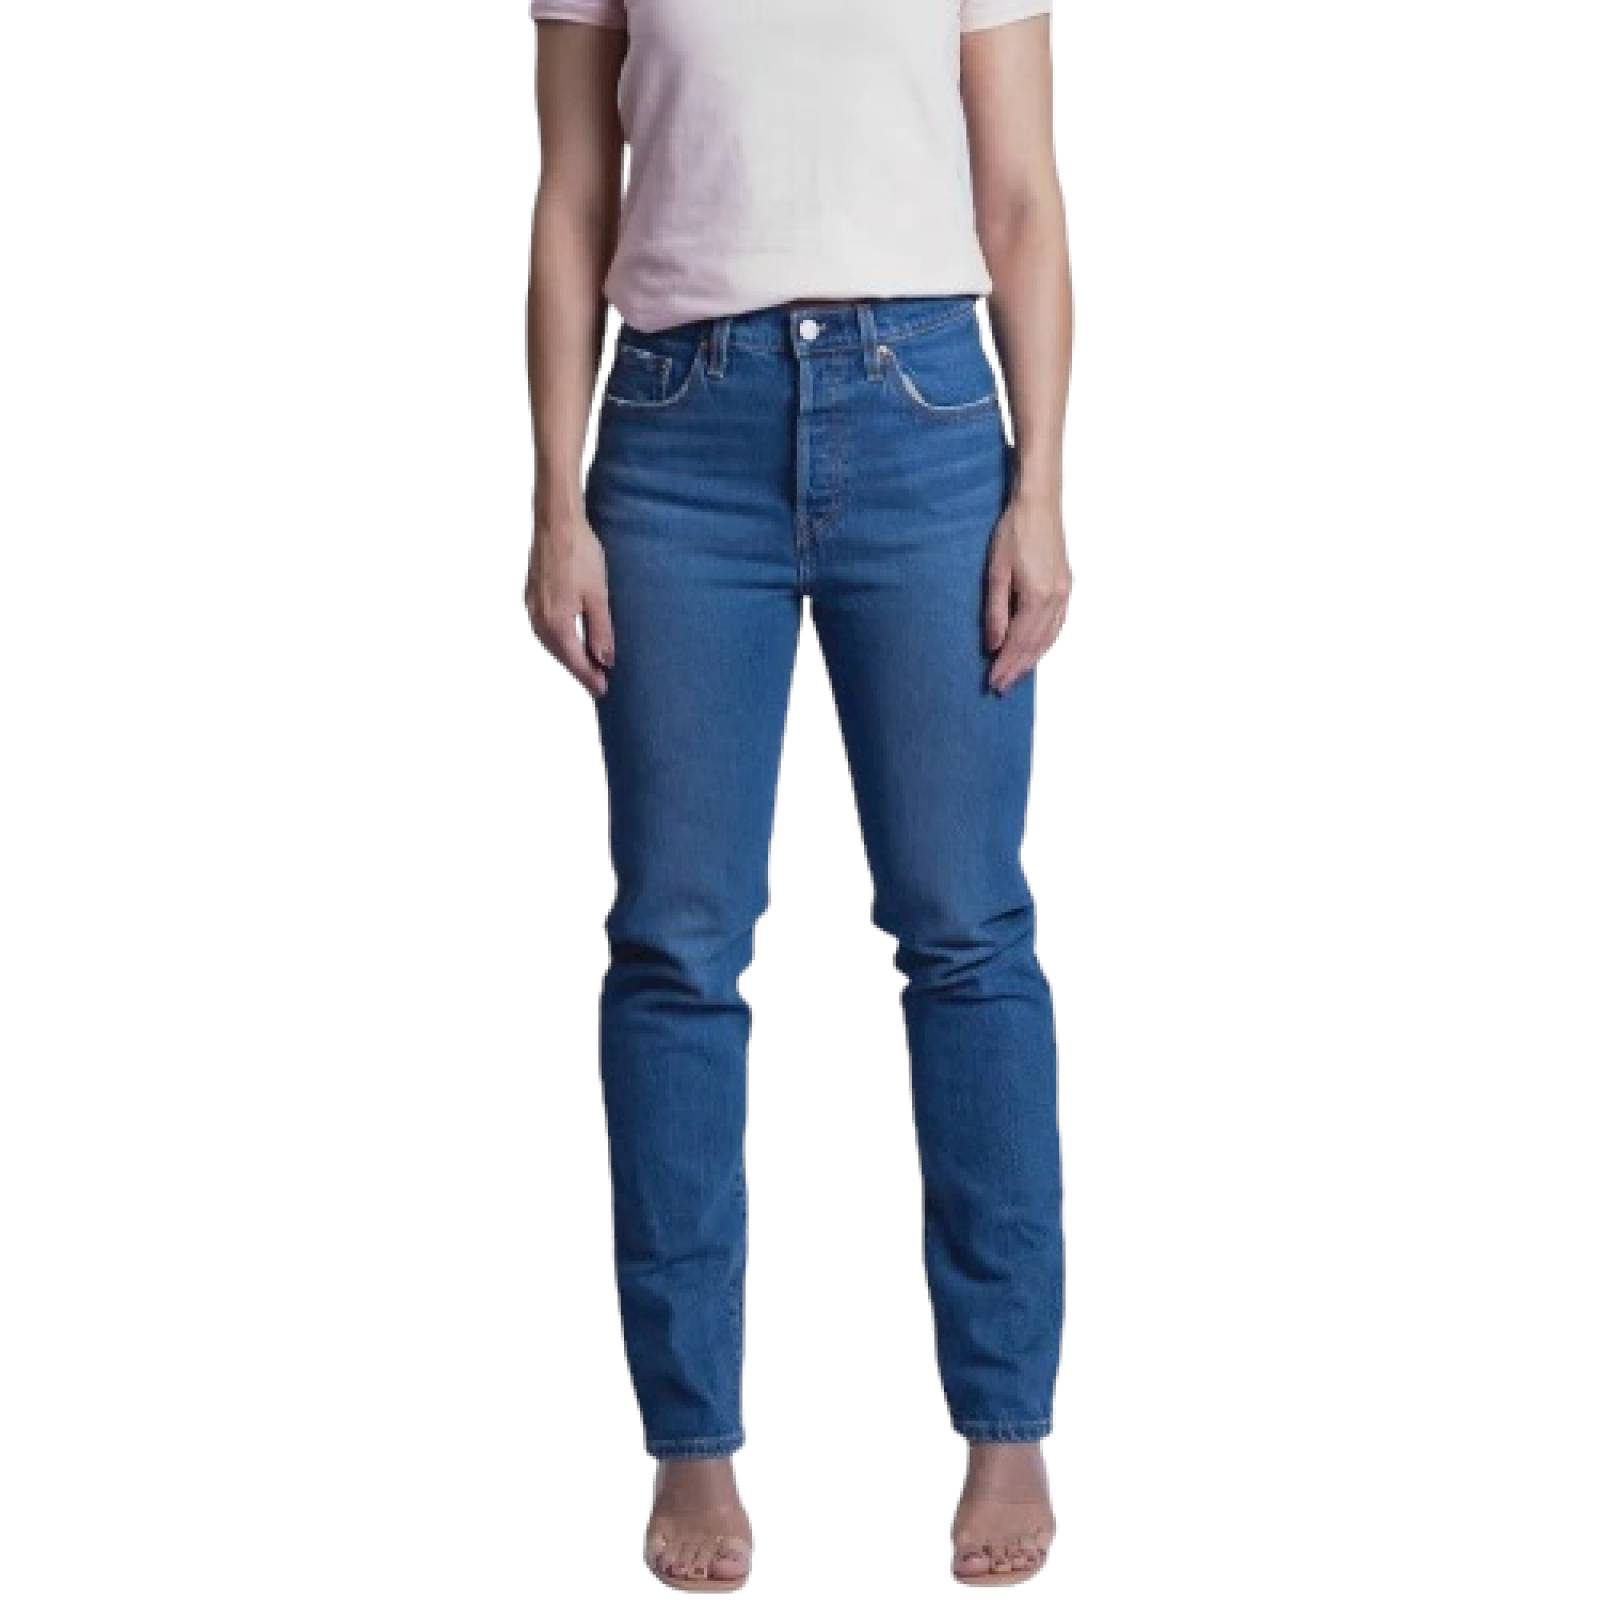 Jeans Levis 501 Original Fit High Rise 12501-0366 Mujer